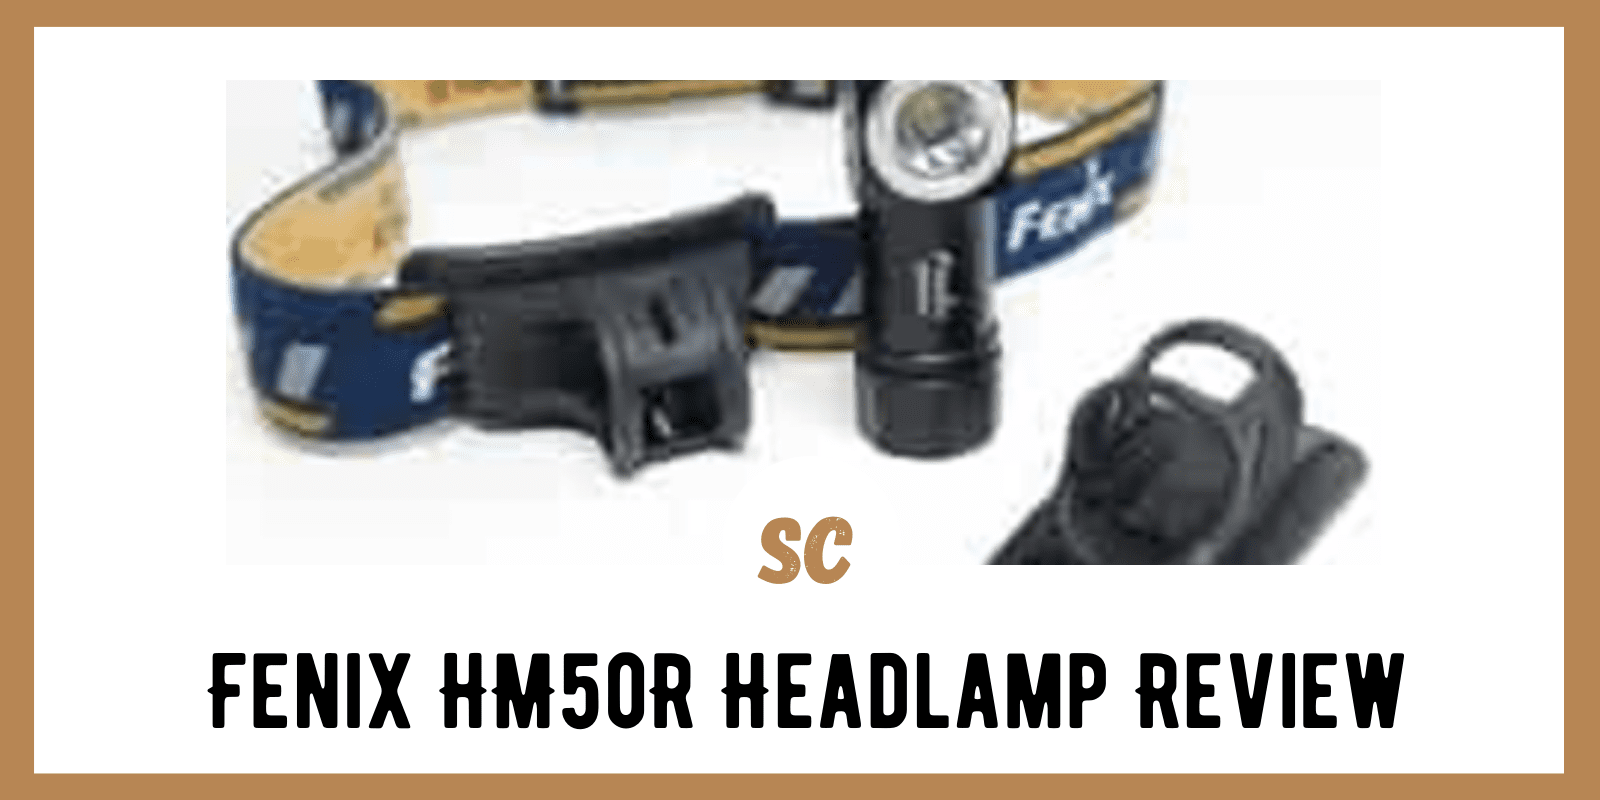 Fenix HM50R Headlamp Review: Hands-On Review